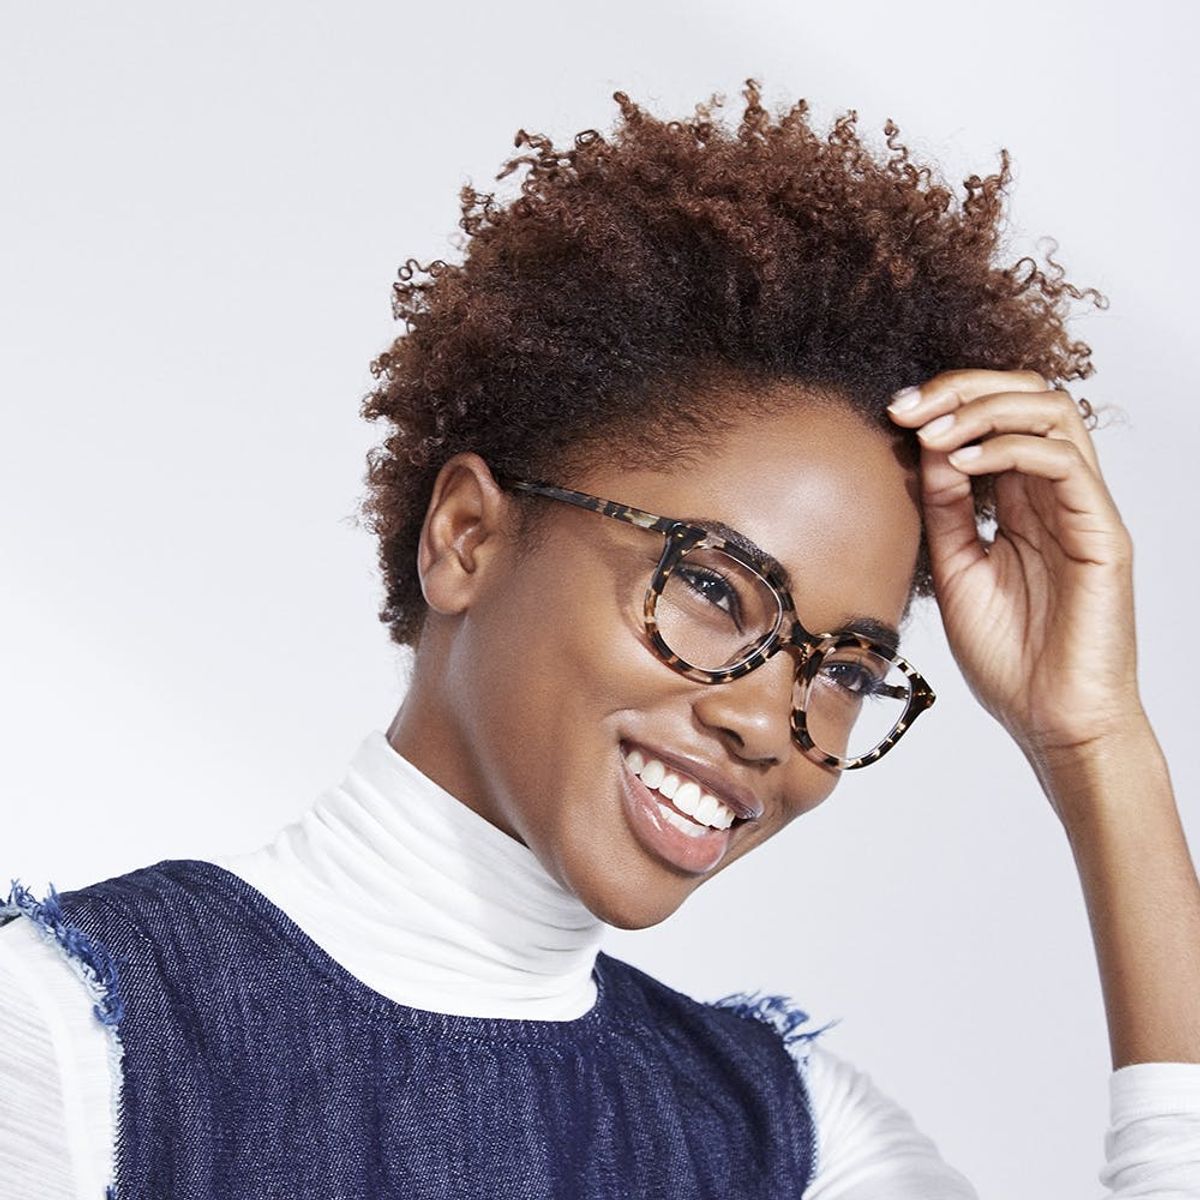 Warby Parker Just Dropped Their New Spring 2017 Frames